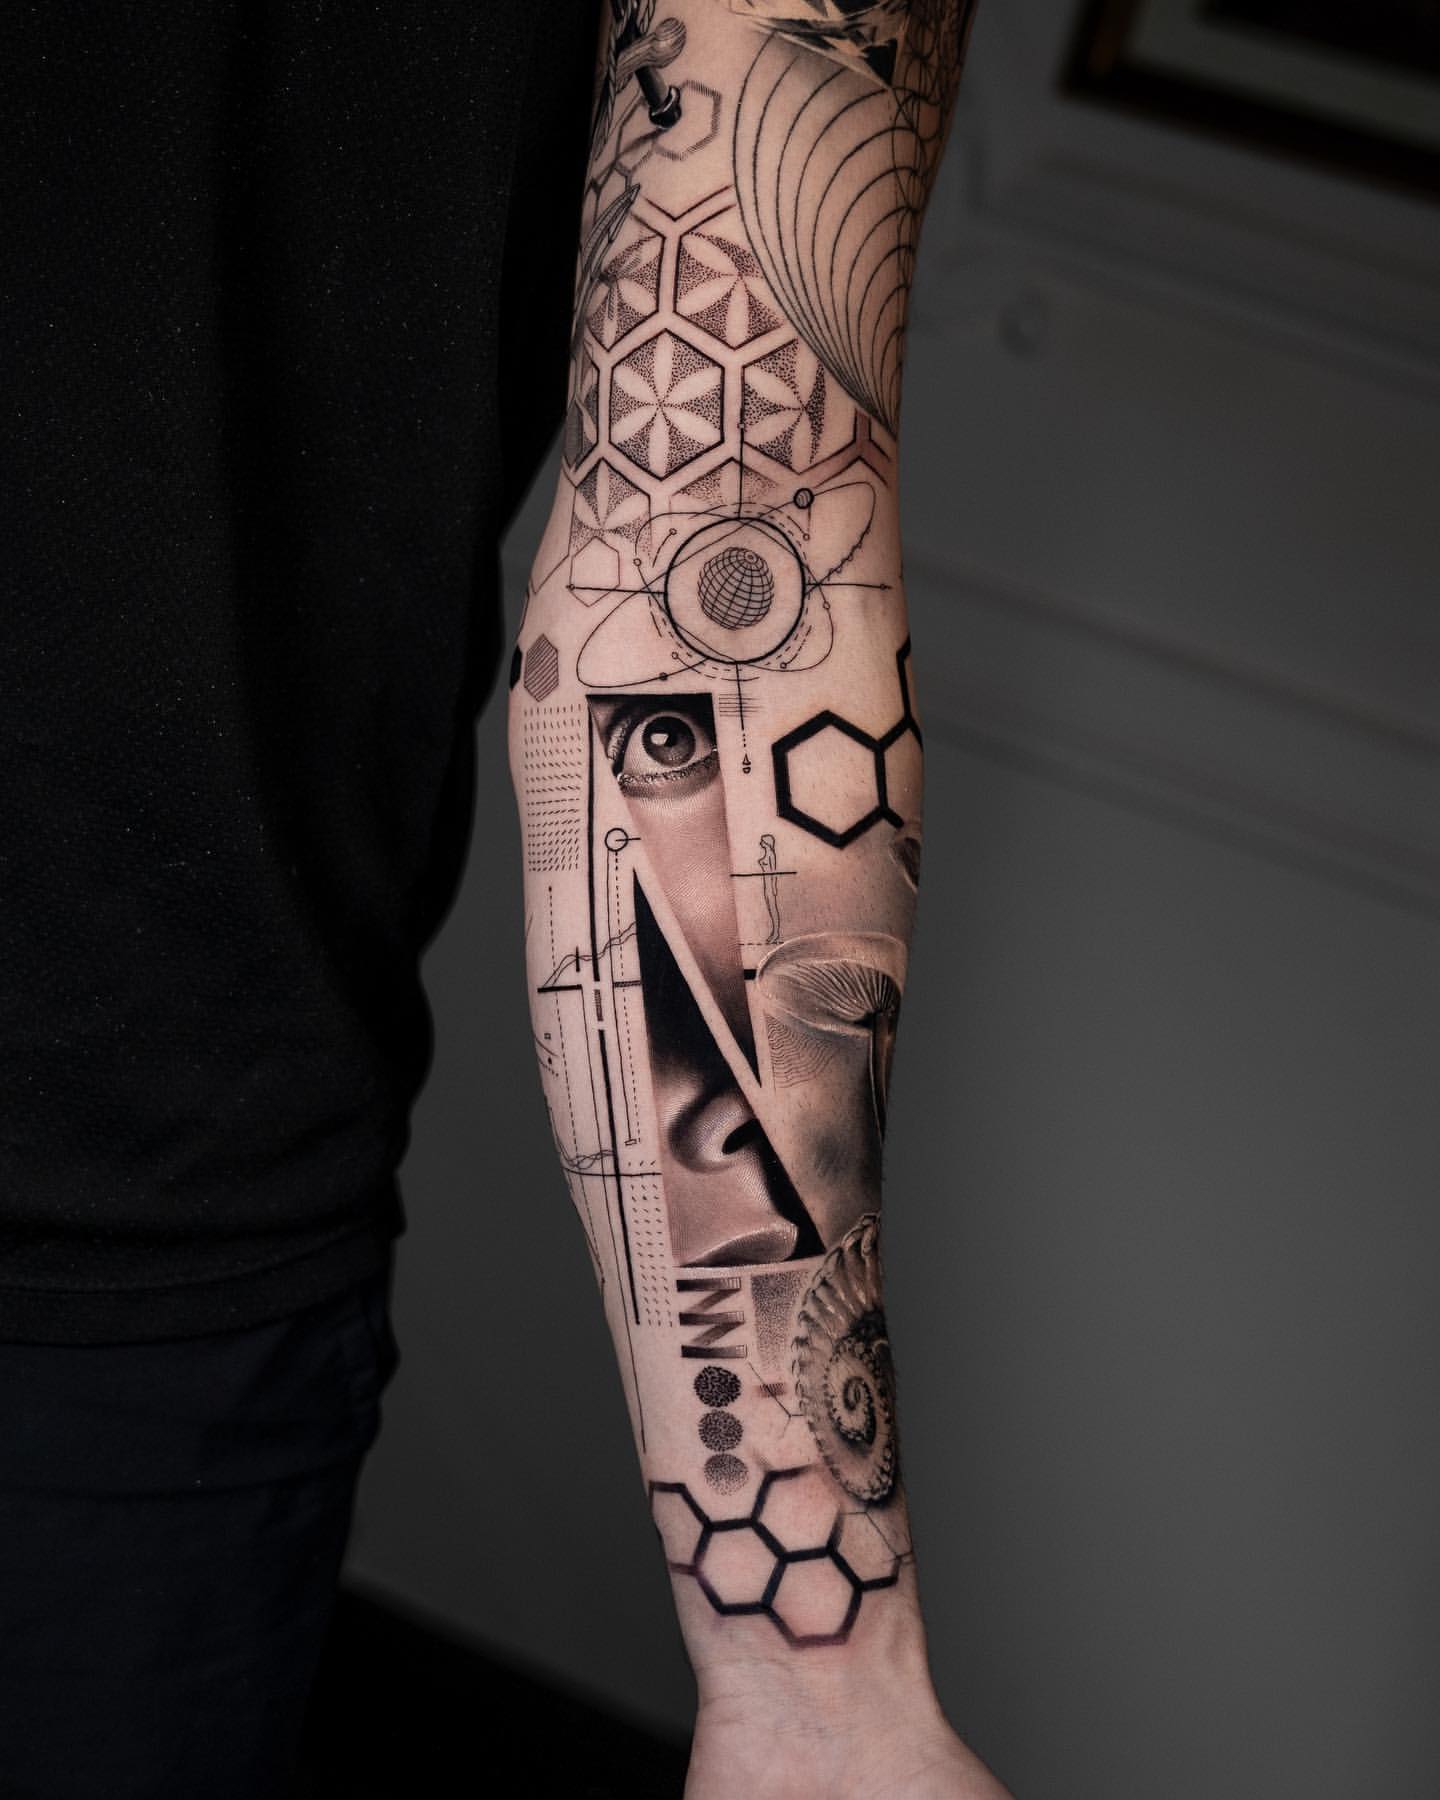 15 Abstract Tattoo Ideas And Designs That Are Works Of Art